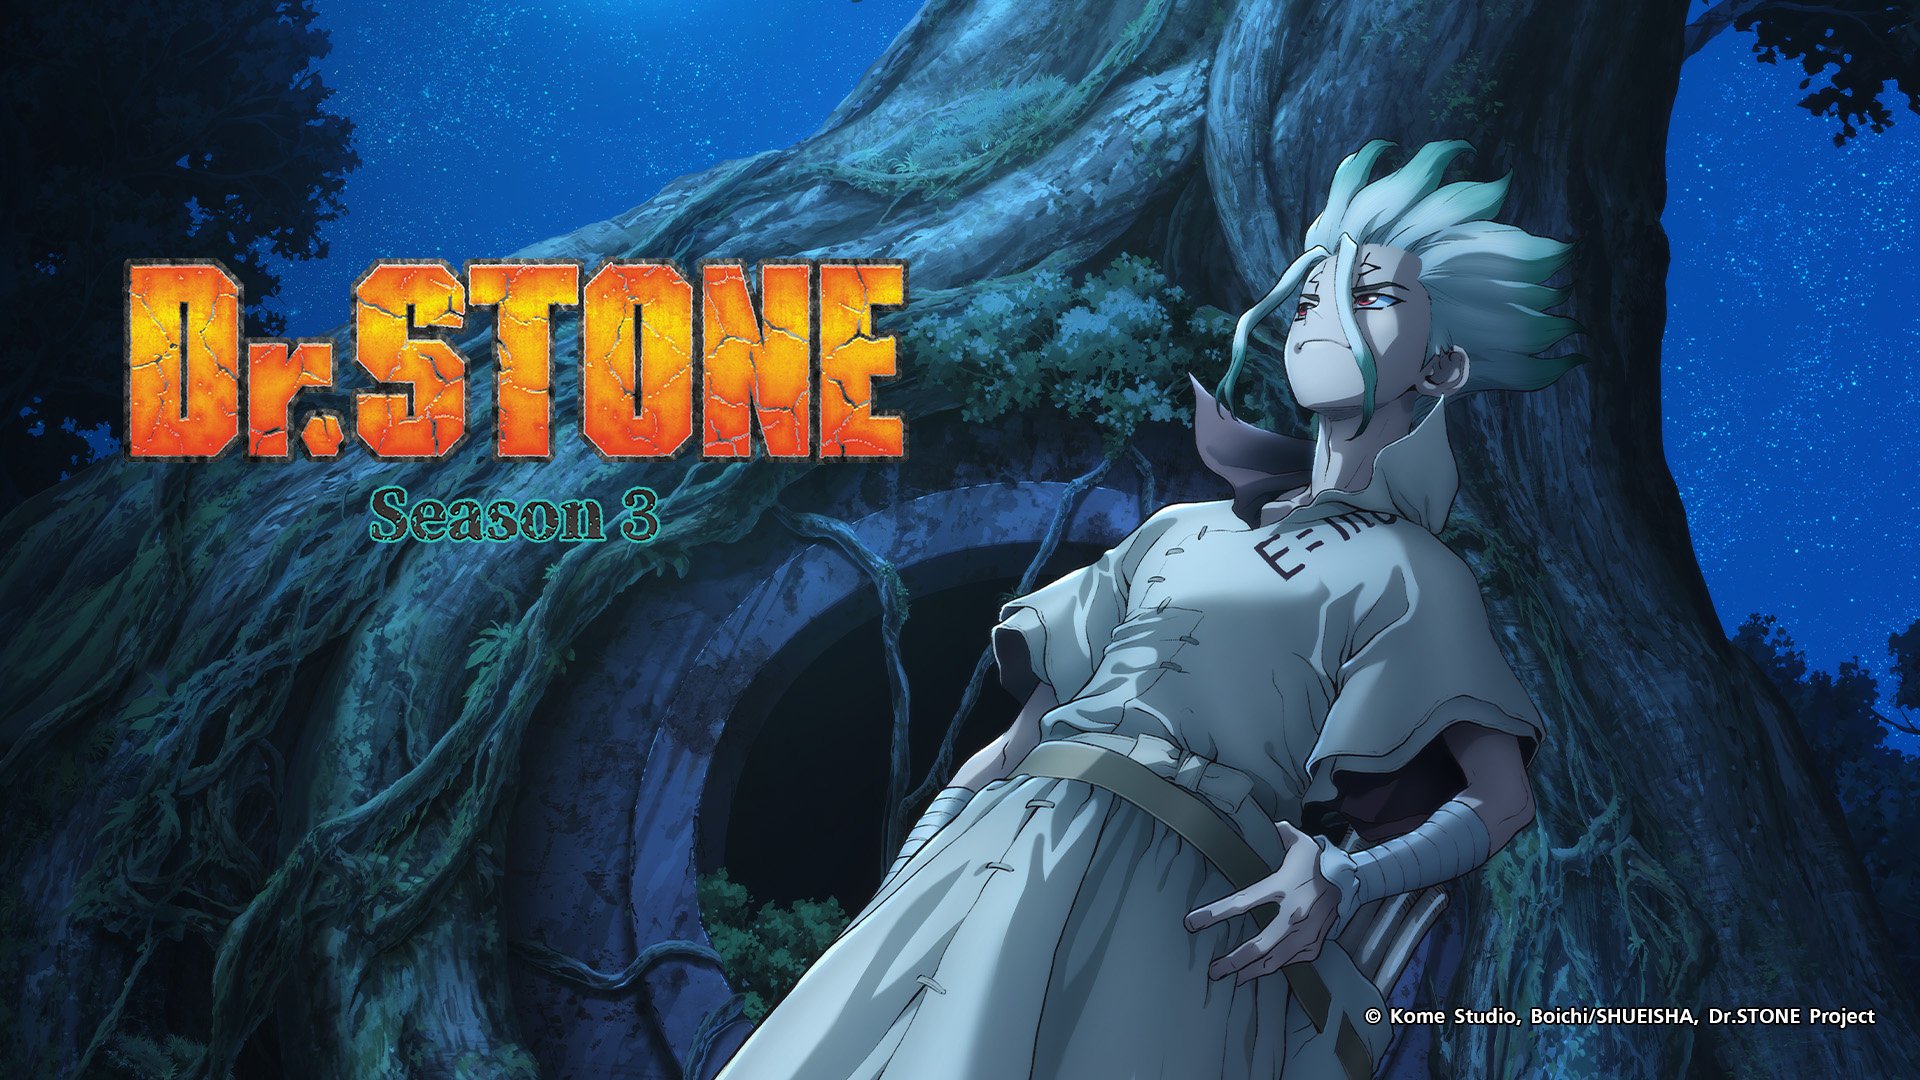 Dr. Stone Season 3 Releases New Trailer: Watch